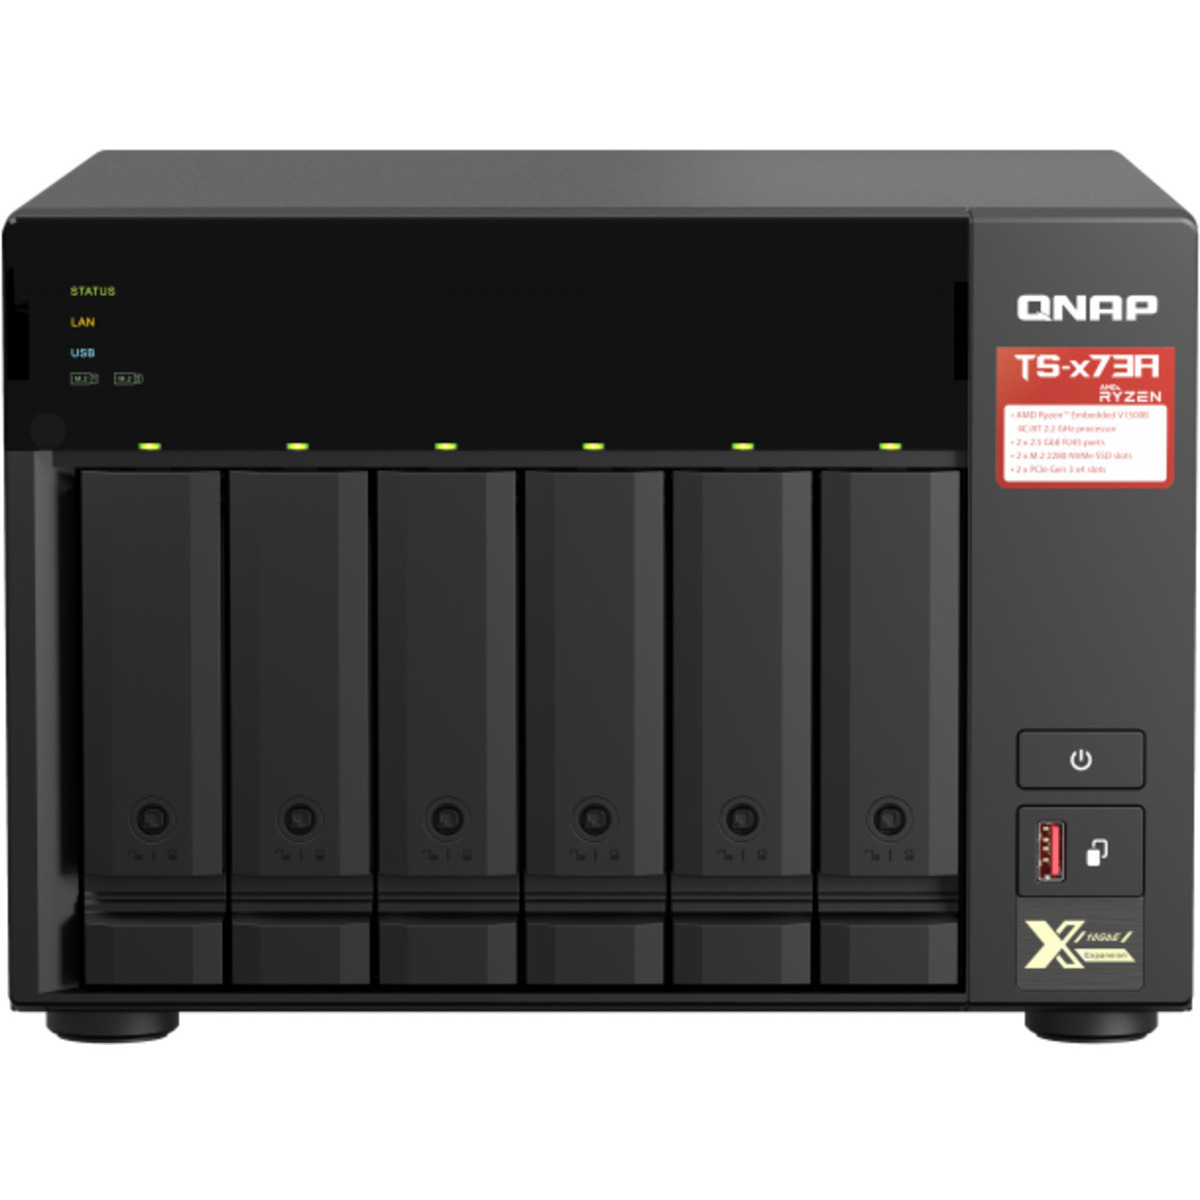 QNAP TS-673A 72tb 6-Bay Desktop Multimedia / Power User / Business NAS - Network Attached Storage Device 6x12tb Seagate IronWolf Pro ST12000NT001 3.5 7200rpm SATA 6Gb/s HDD NAS Class Drives Installed - Burn-In Tested - ON SALE TS-673A